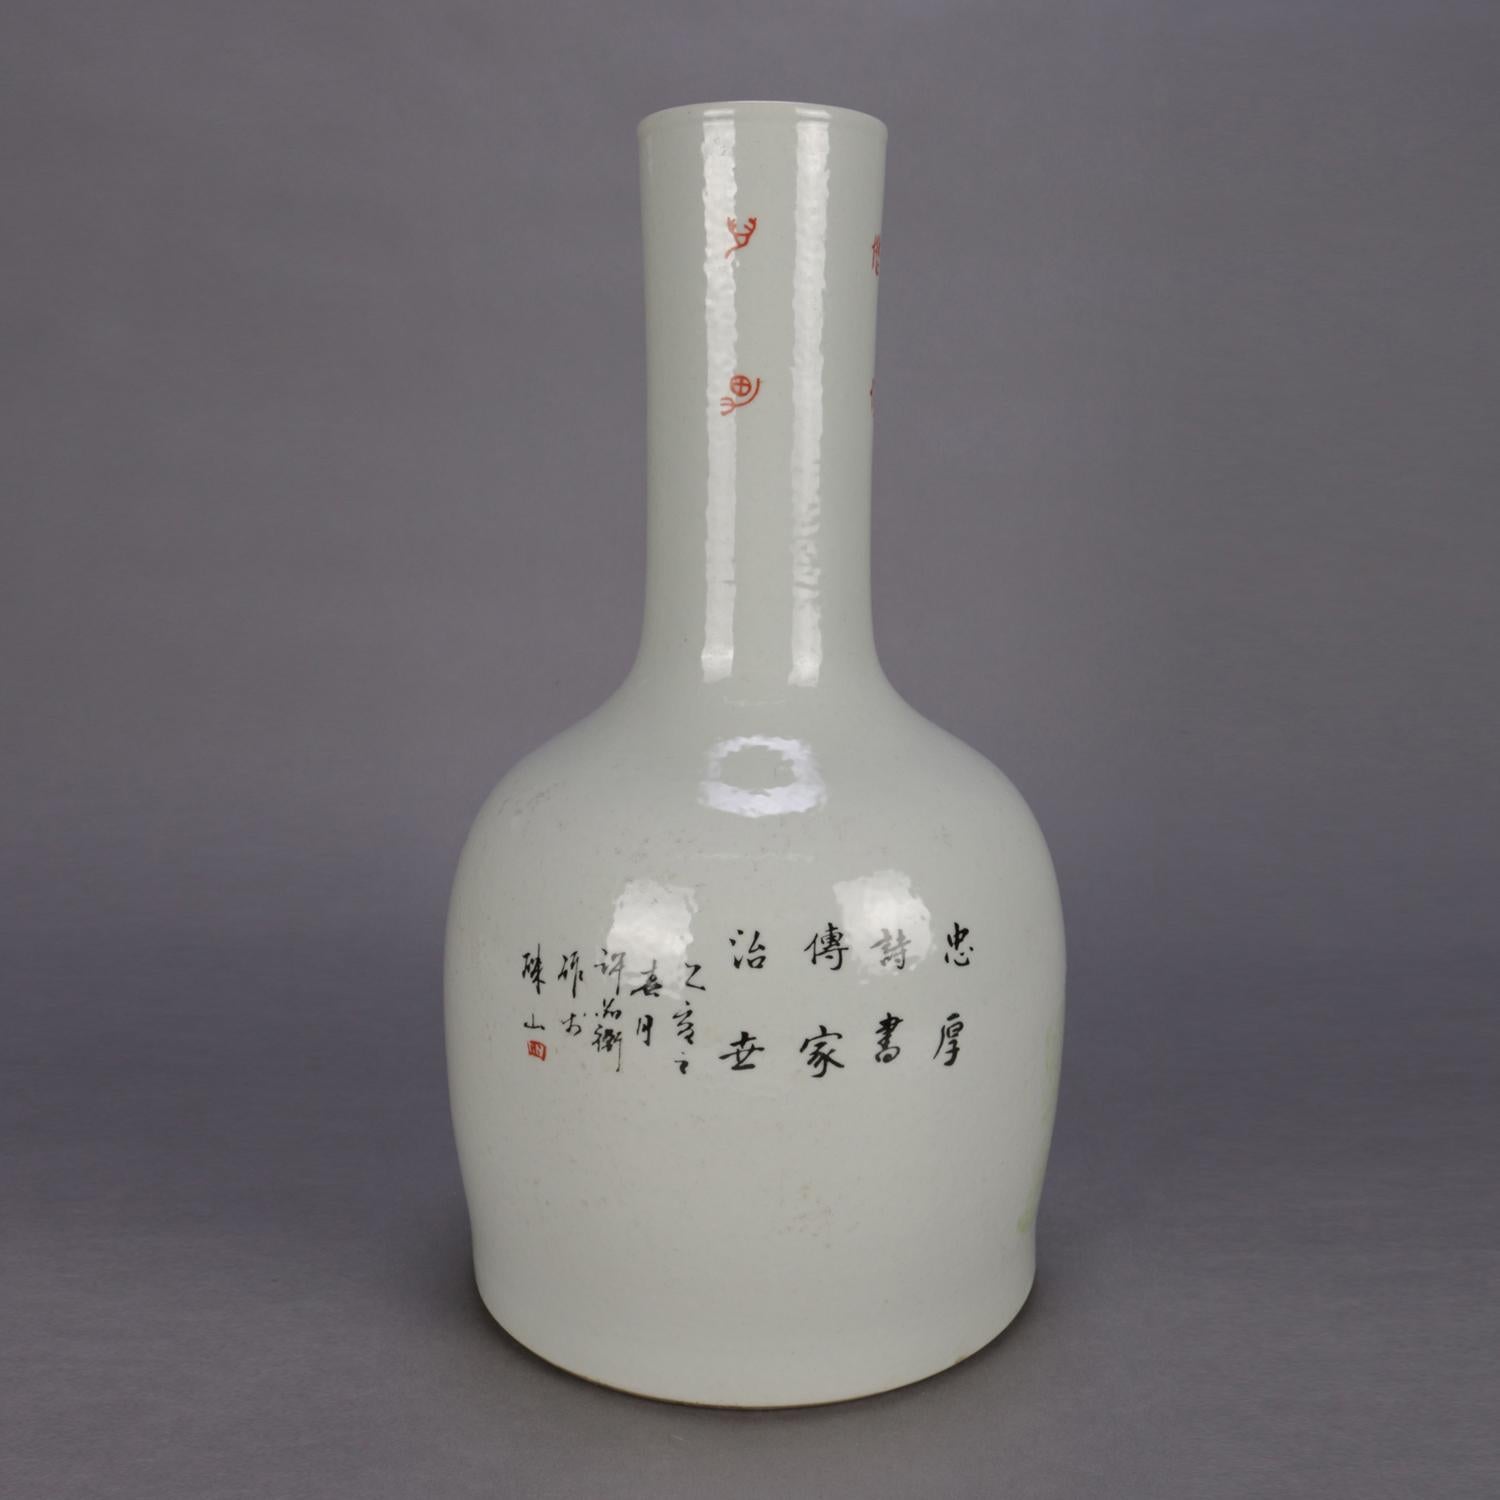 Hand-Painted Antique Chinese Hand Painted and Signed Bottle Vase, 19th Century